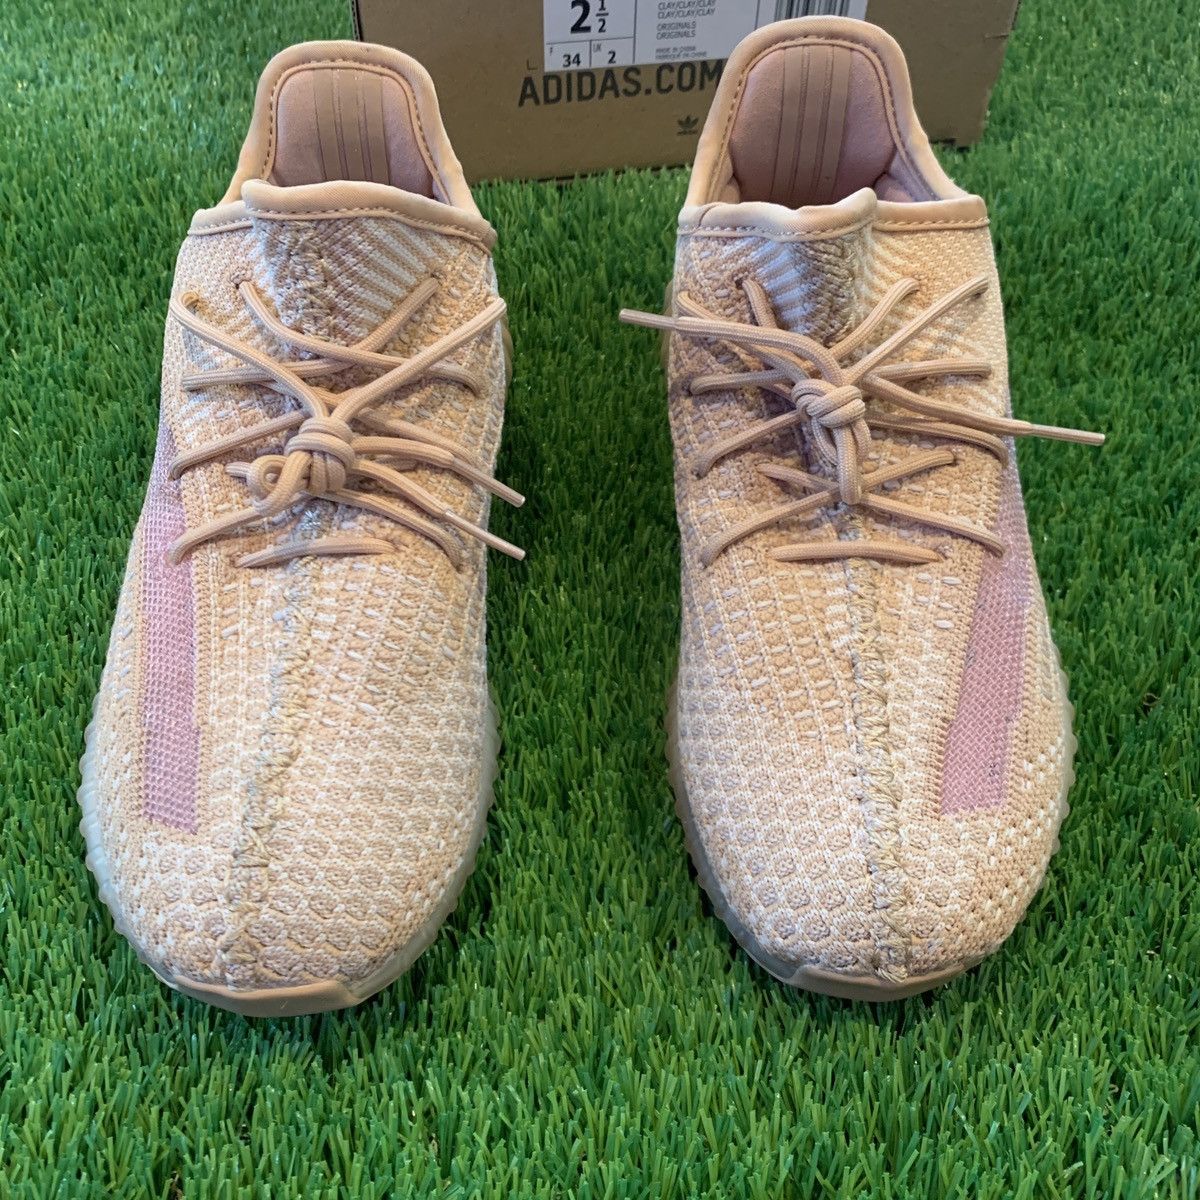 Adidas Kids Size 2.5 Yeezy Boost 350 V2 Clay(read description) Size US 5 / EU 37 - 8 Preview